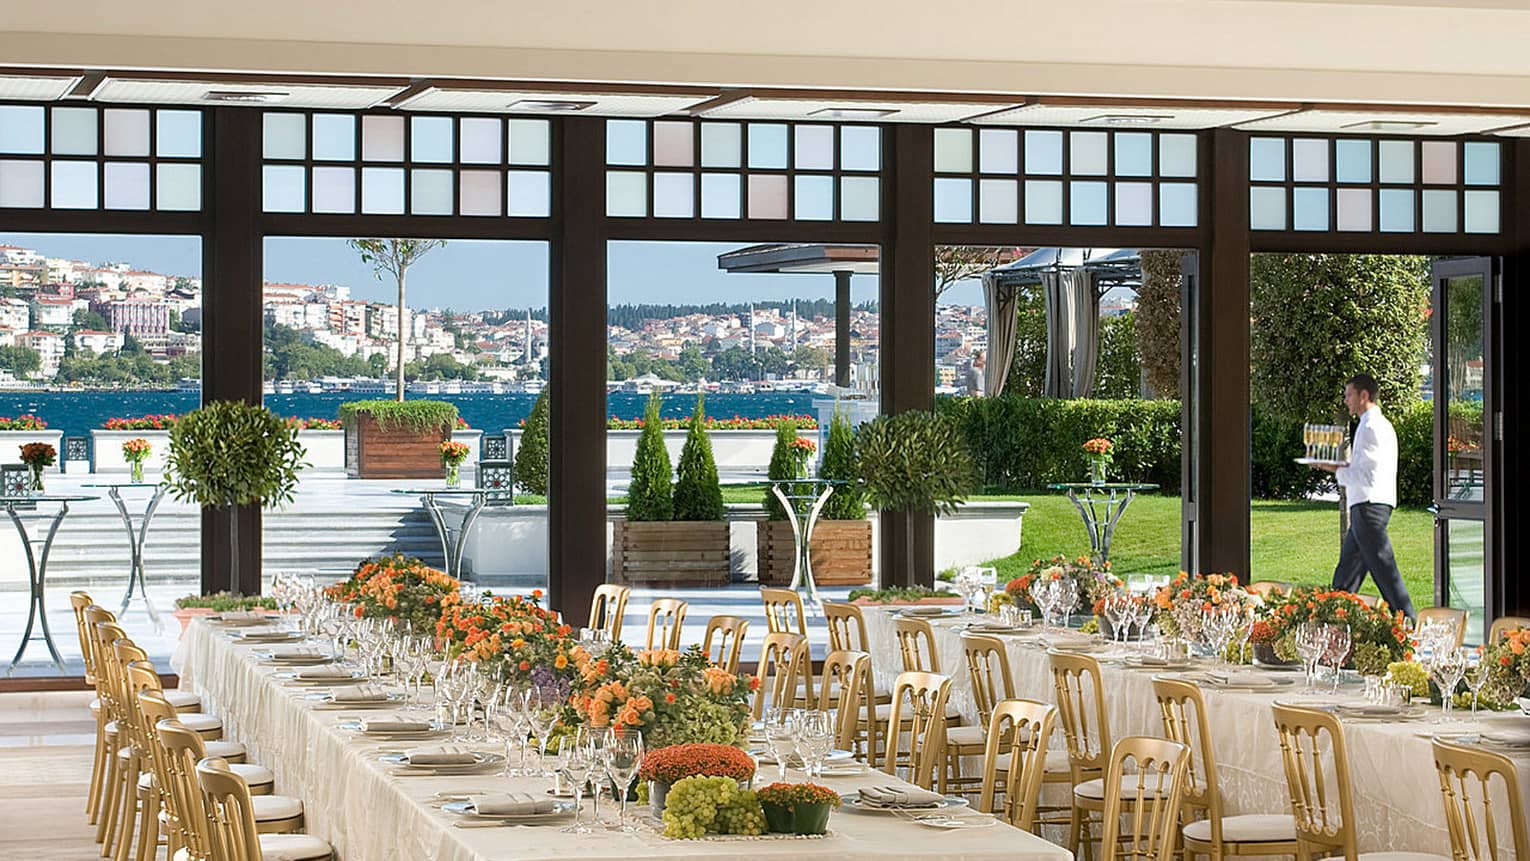 Bosphorus Ballroom long banquet tables with gold chairs under chandeliers, near open wall to terrace